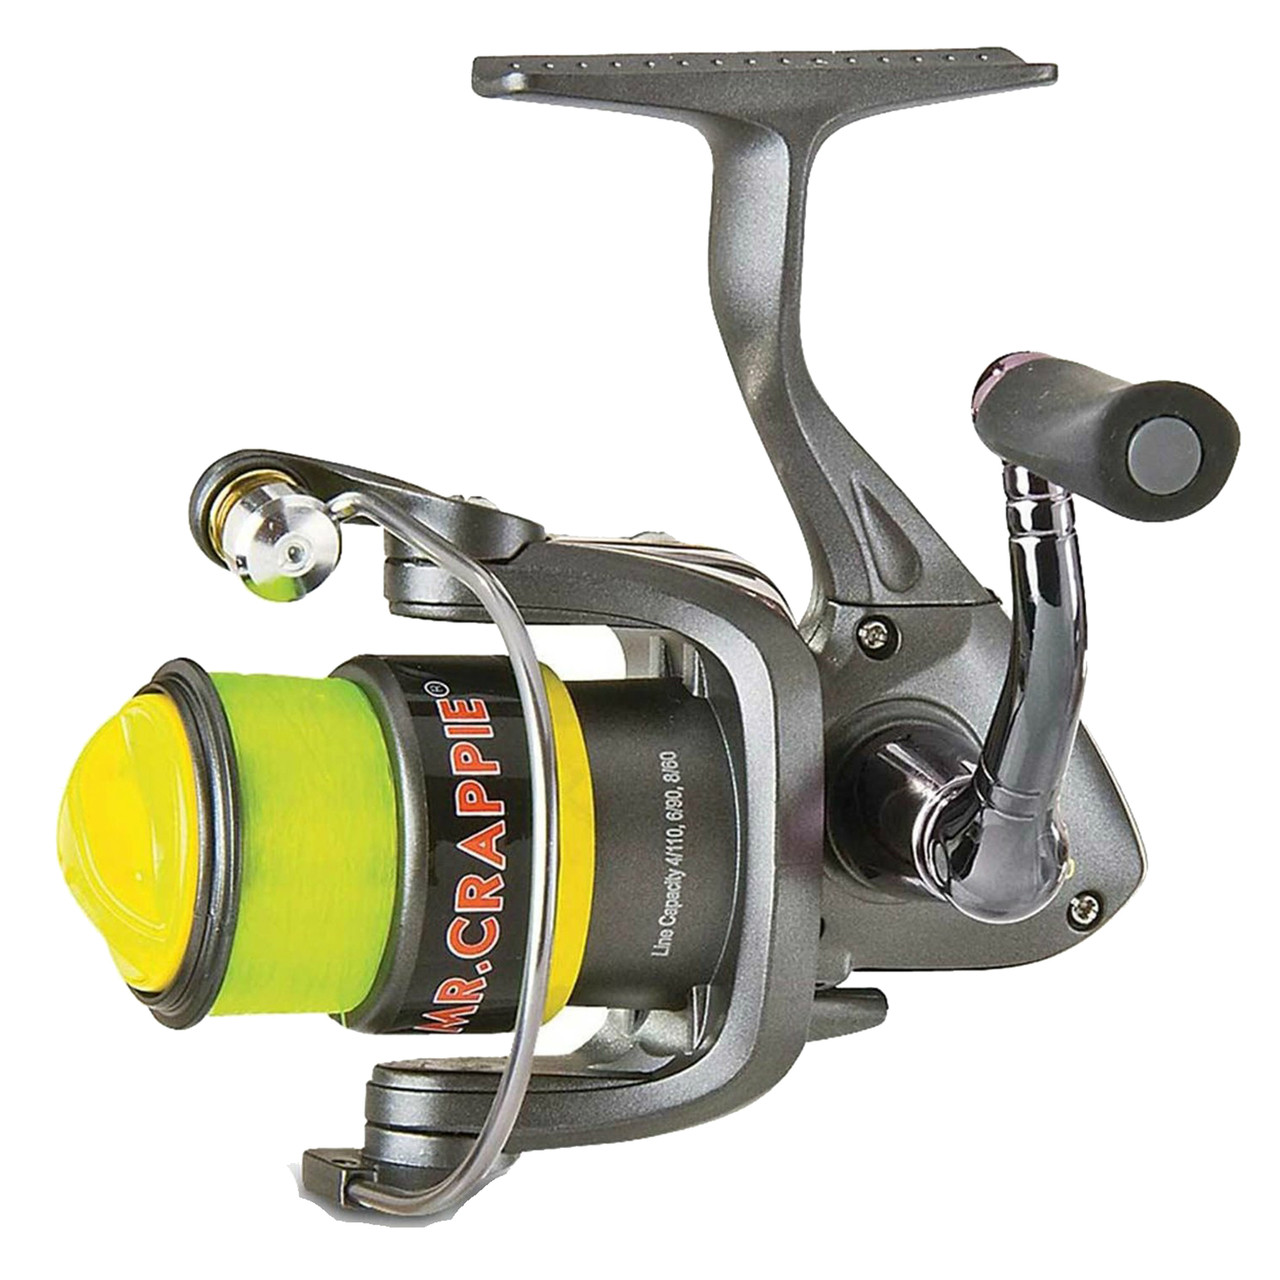 https://cdn10.bigcommerce.com/s-hudw0p8/products/37027/images/5155/mcs100-lew-s-mr-crappie-slab-shaker-spinning-reel-1__17279.1531268111.1280.1280.jpg?c=2